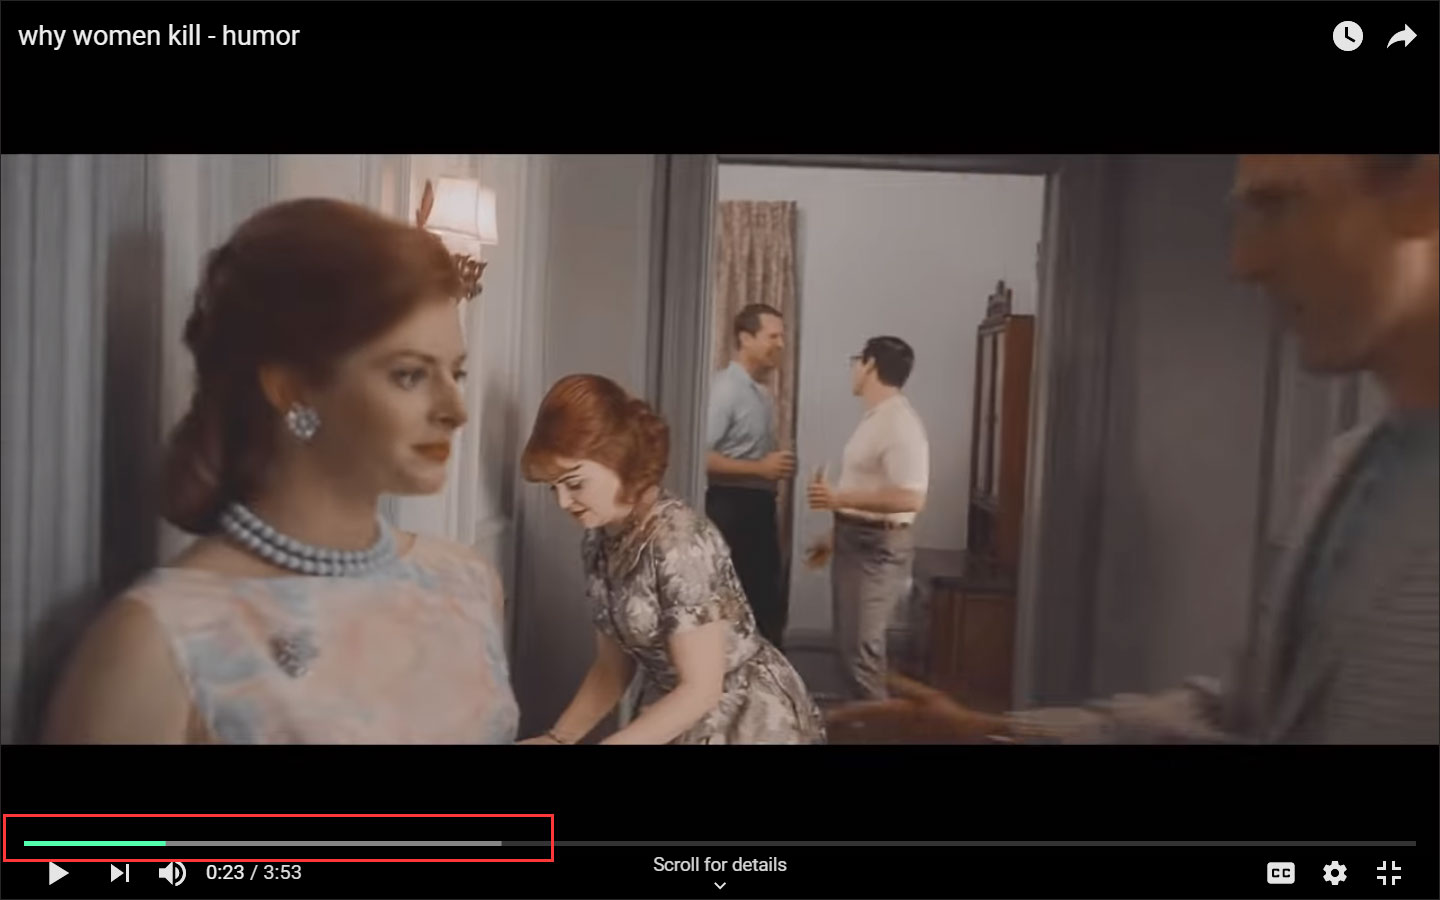 buffering bar is changing its appearance